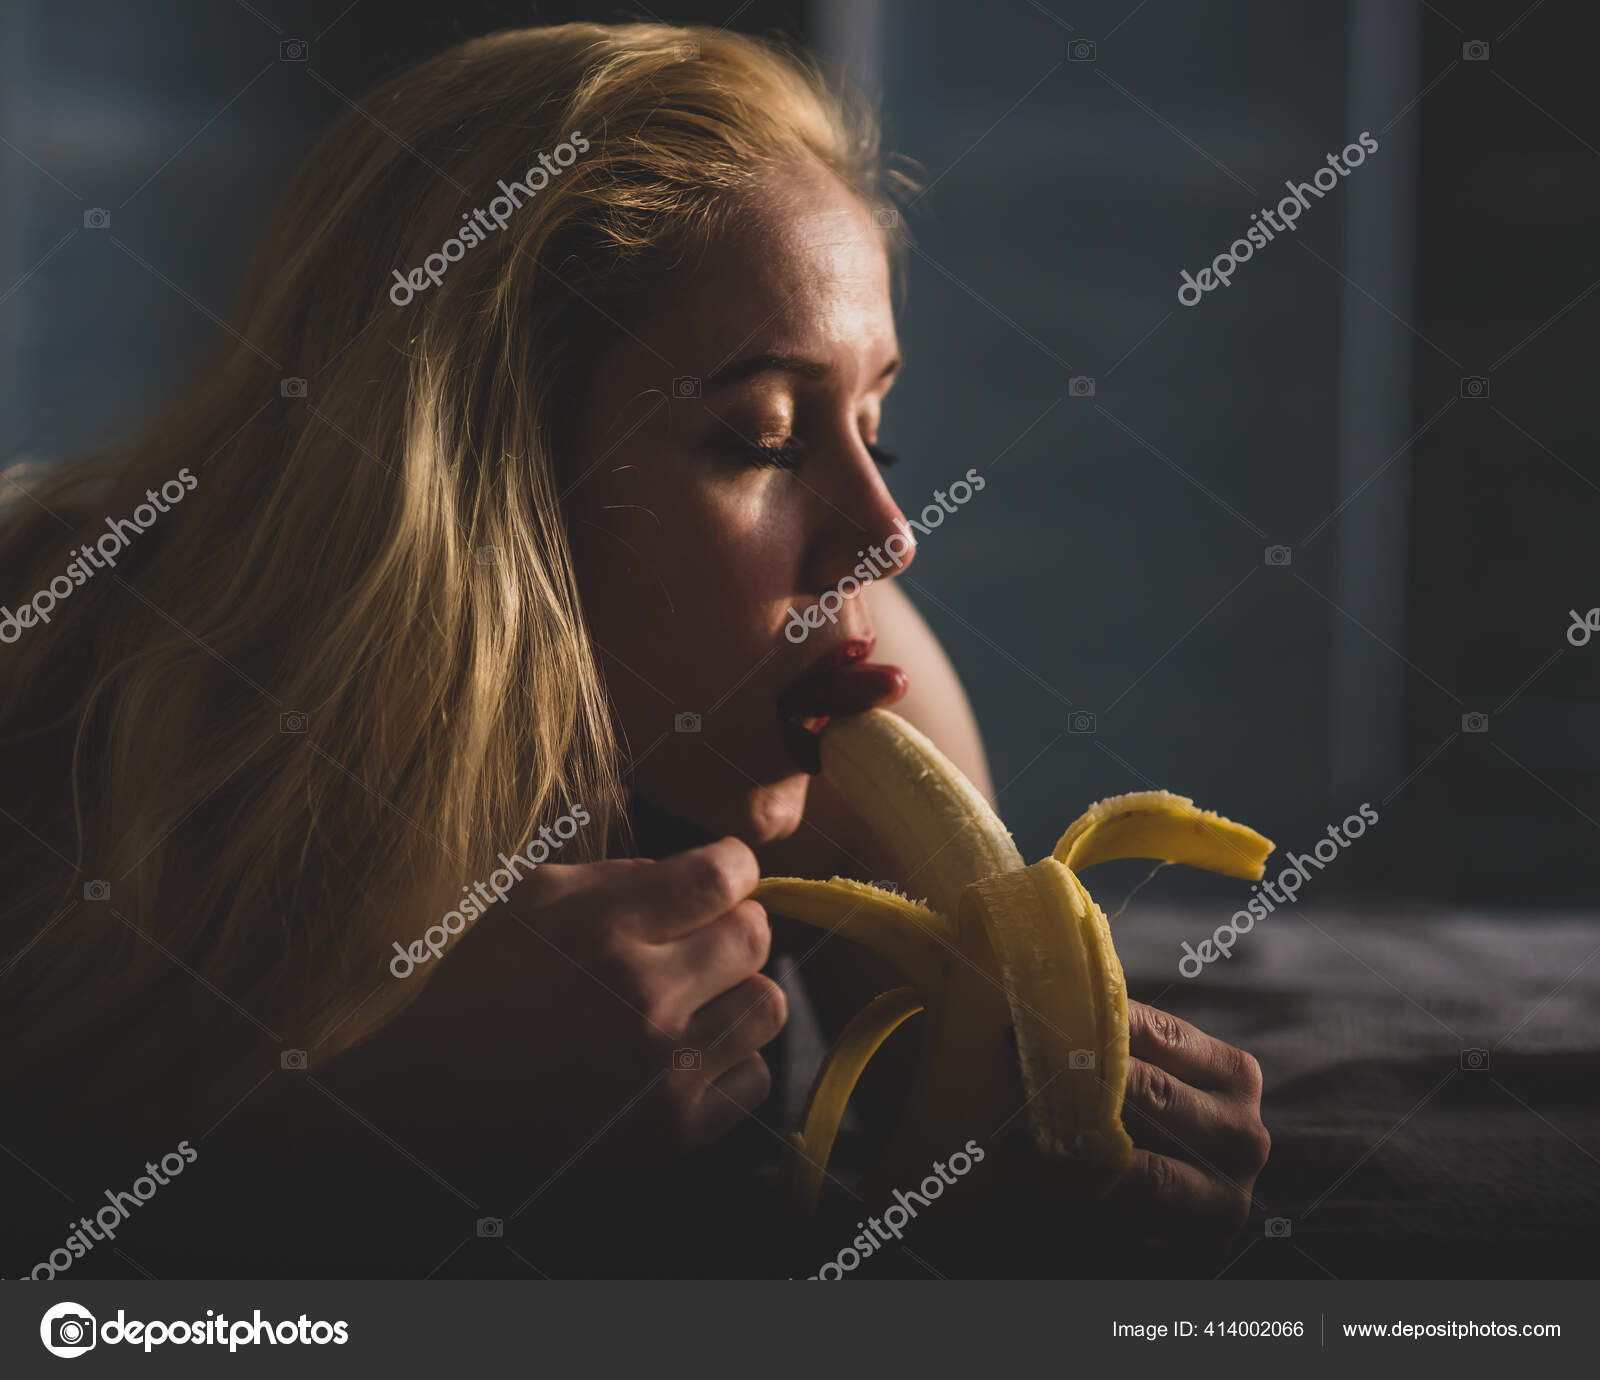 The blonde imitates oral sex and sucks a banana Stock Photo by ©inside-studio 414002066